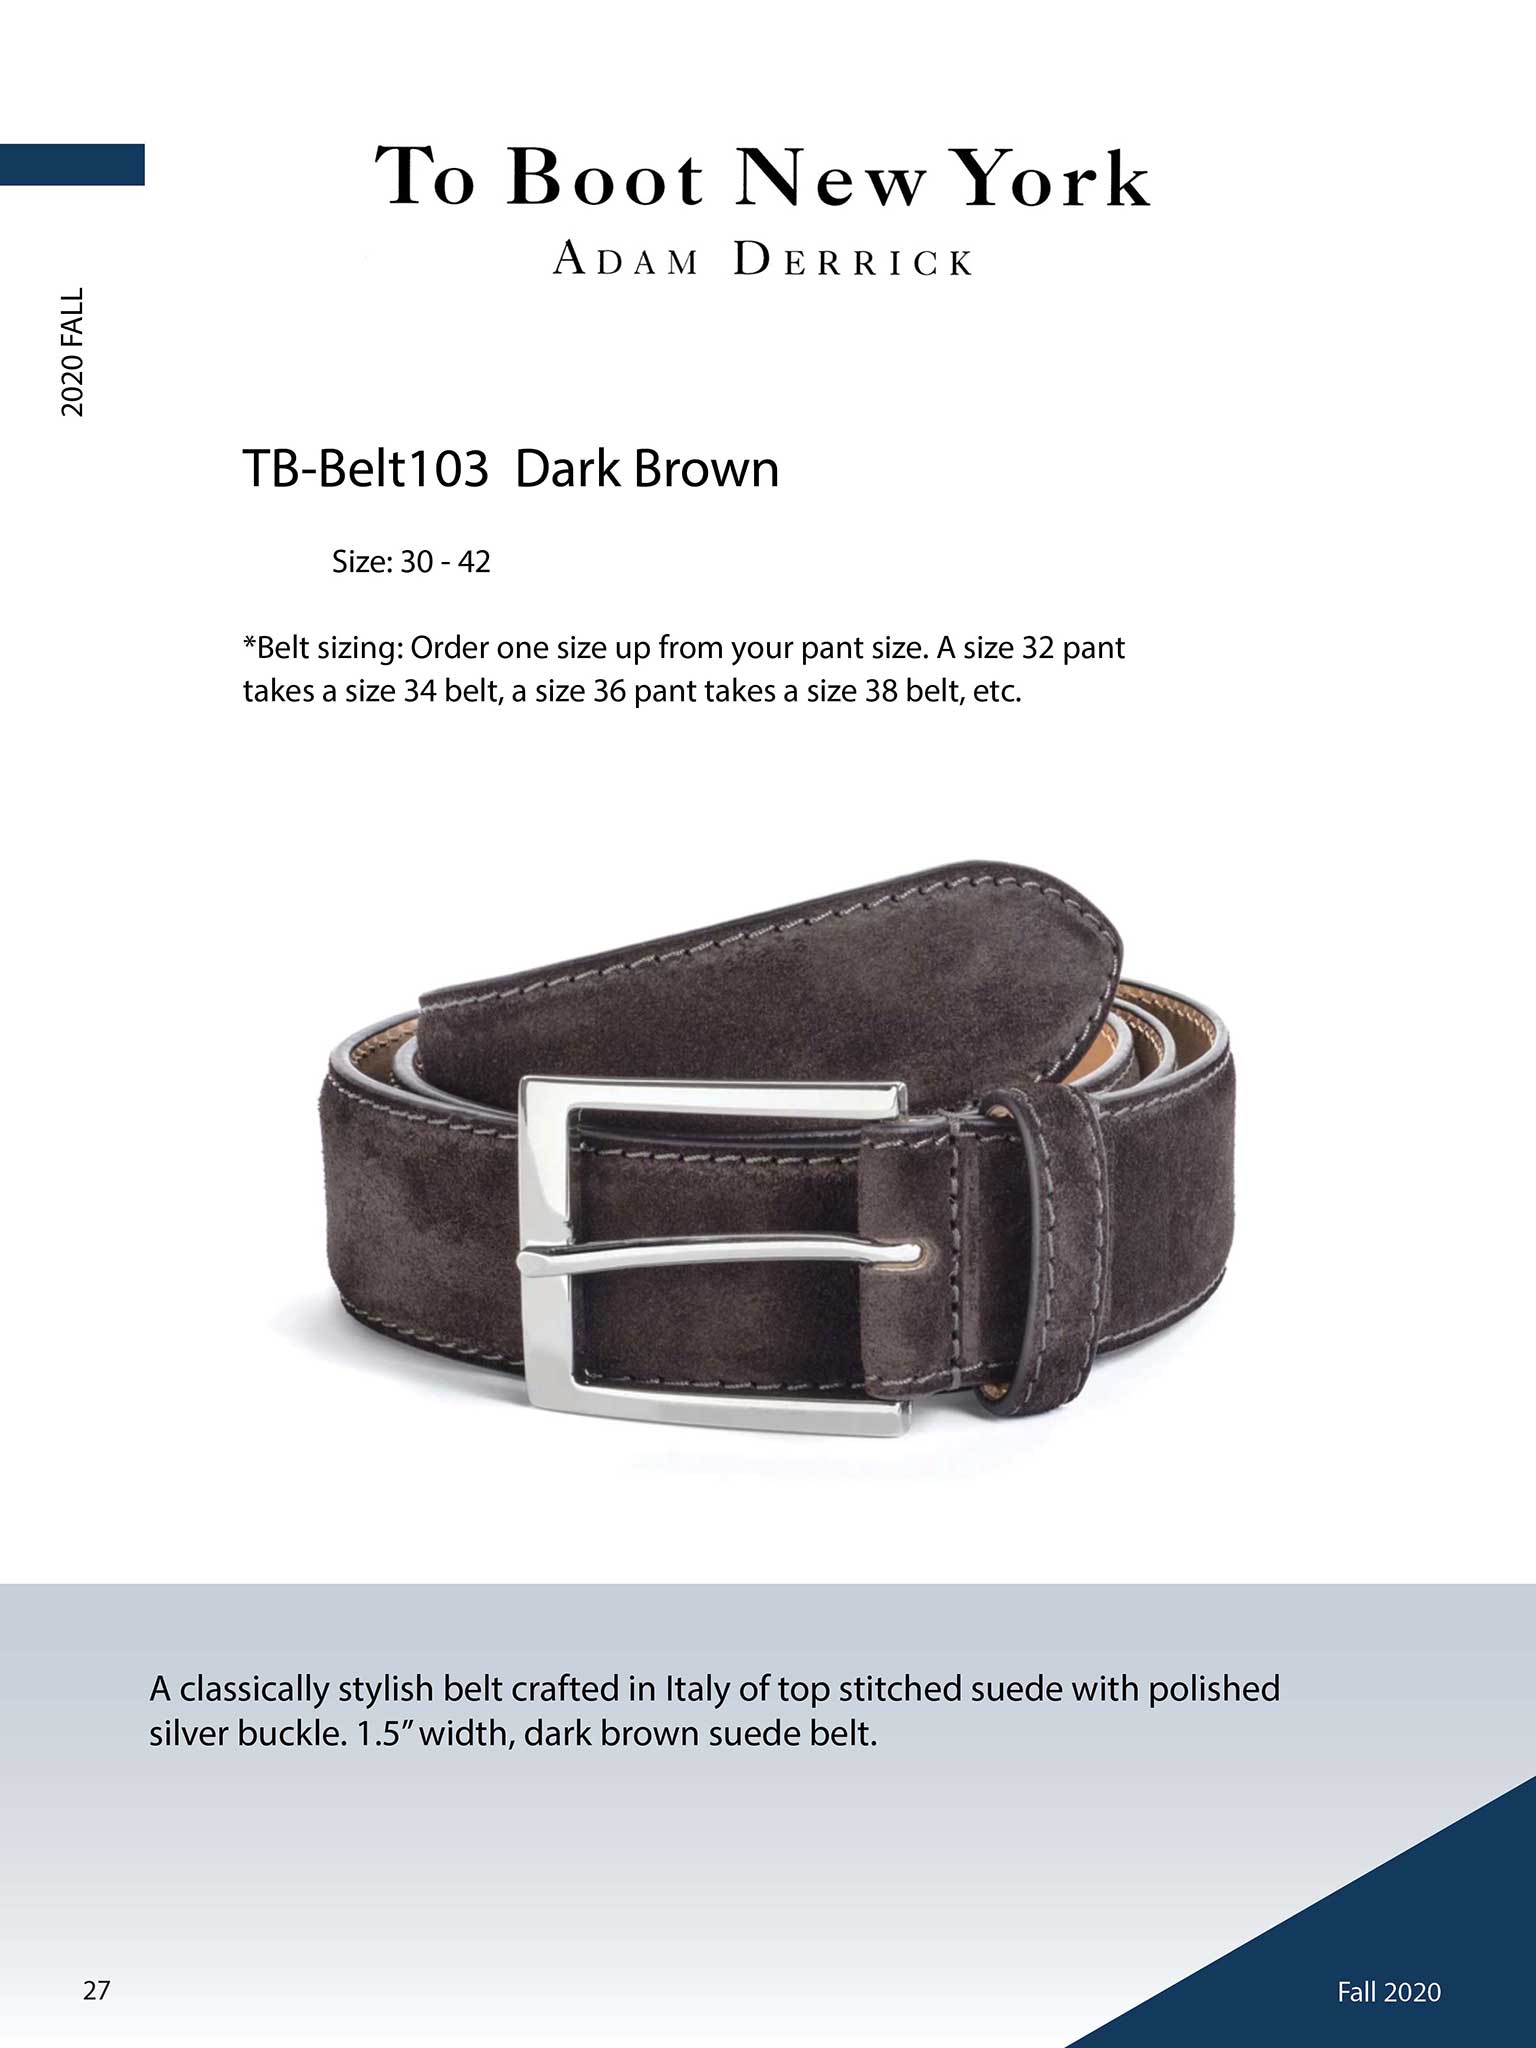 To Boot New York                                                                                                                                                                                                                                          , Dark Brown Suede Belt by To Boot New York